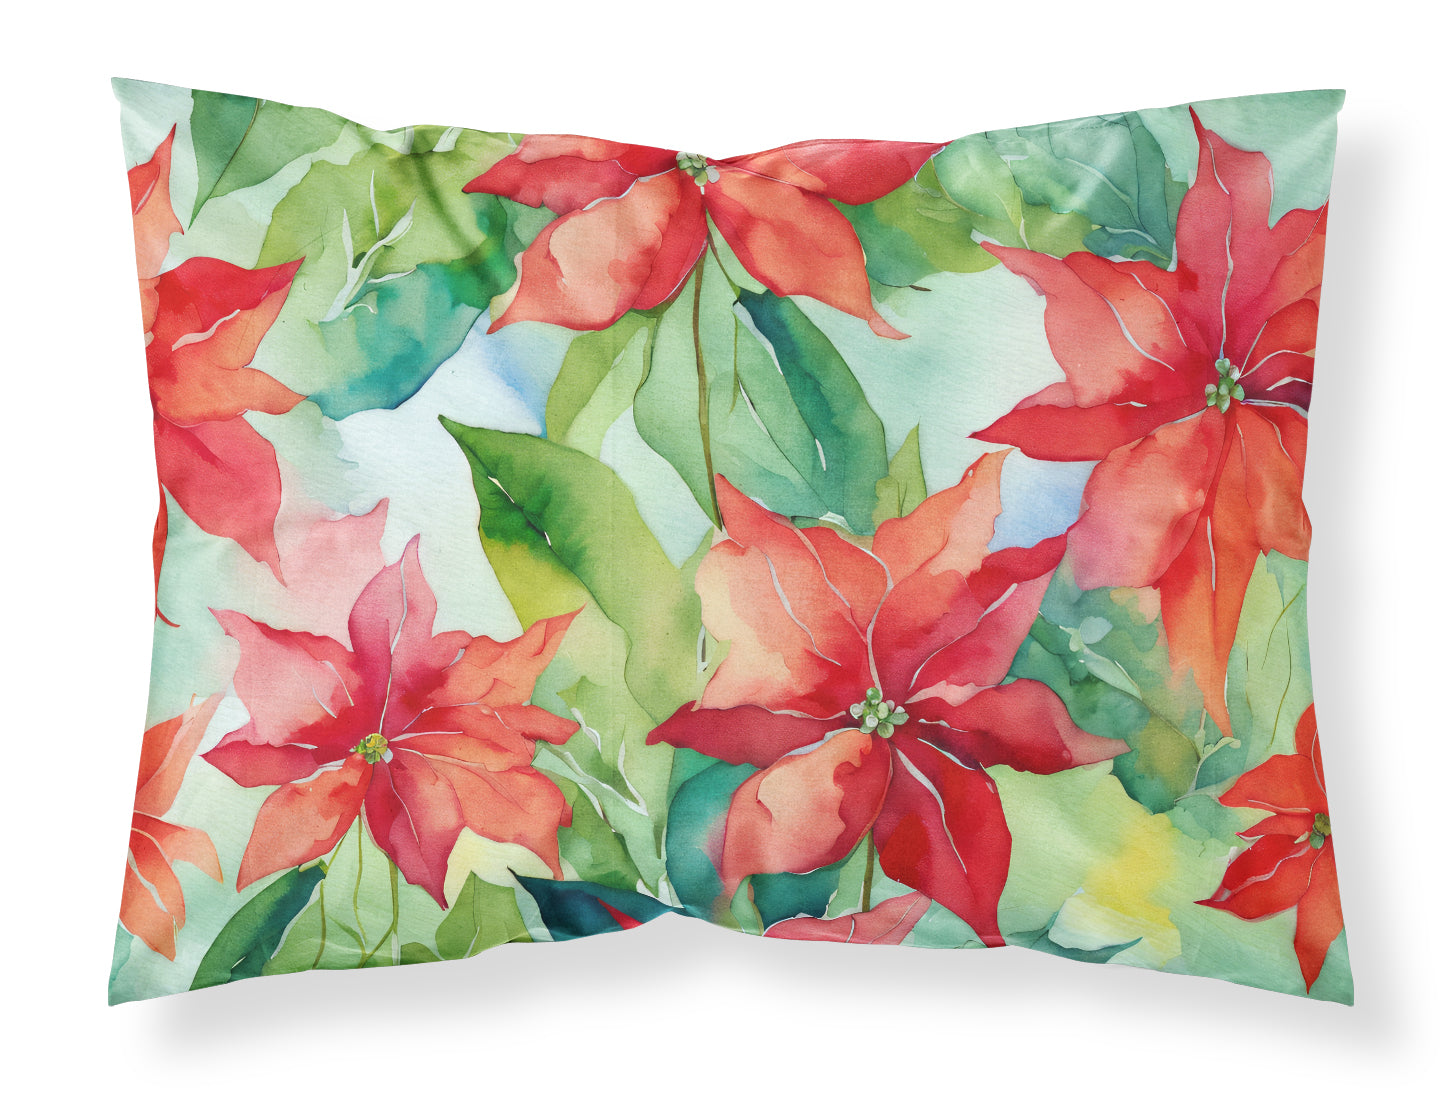 Buy this Poinsettias in Watercolor Fabric Standard Pillowcase